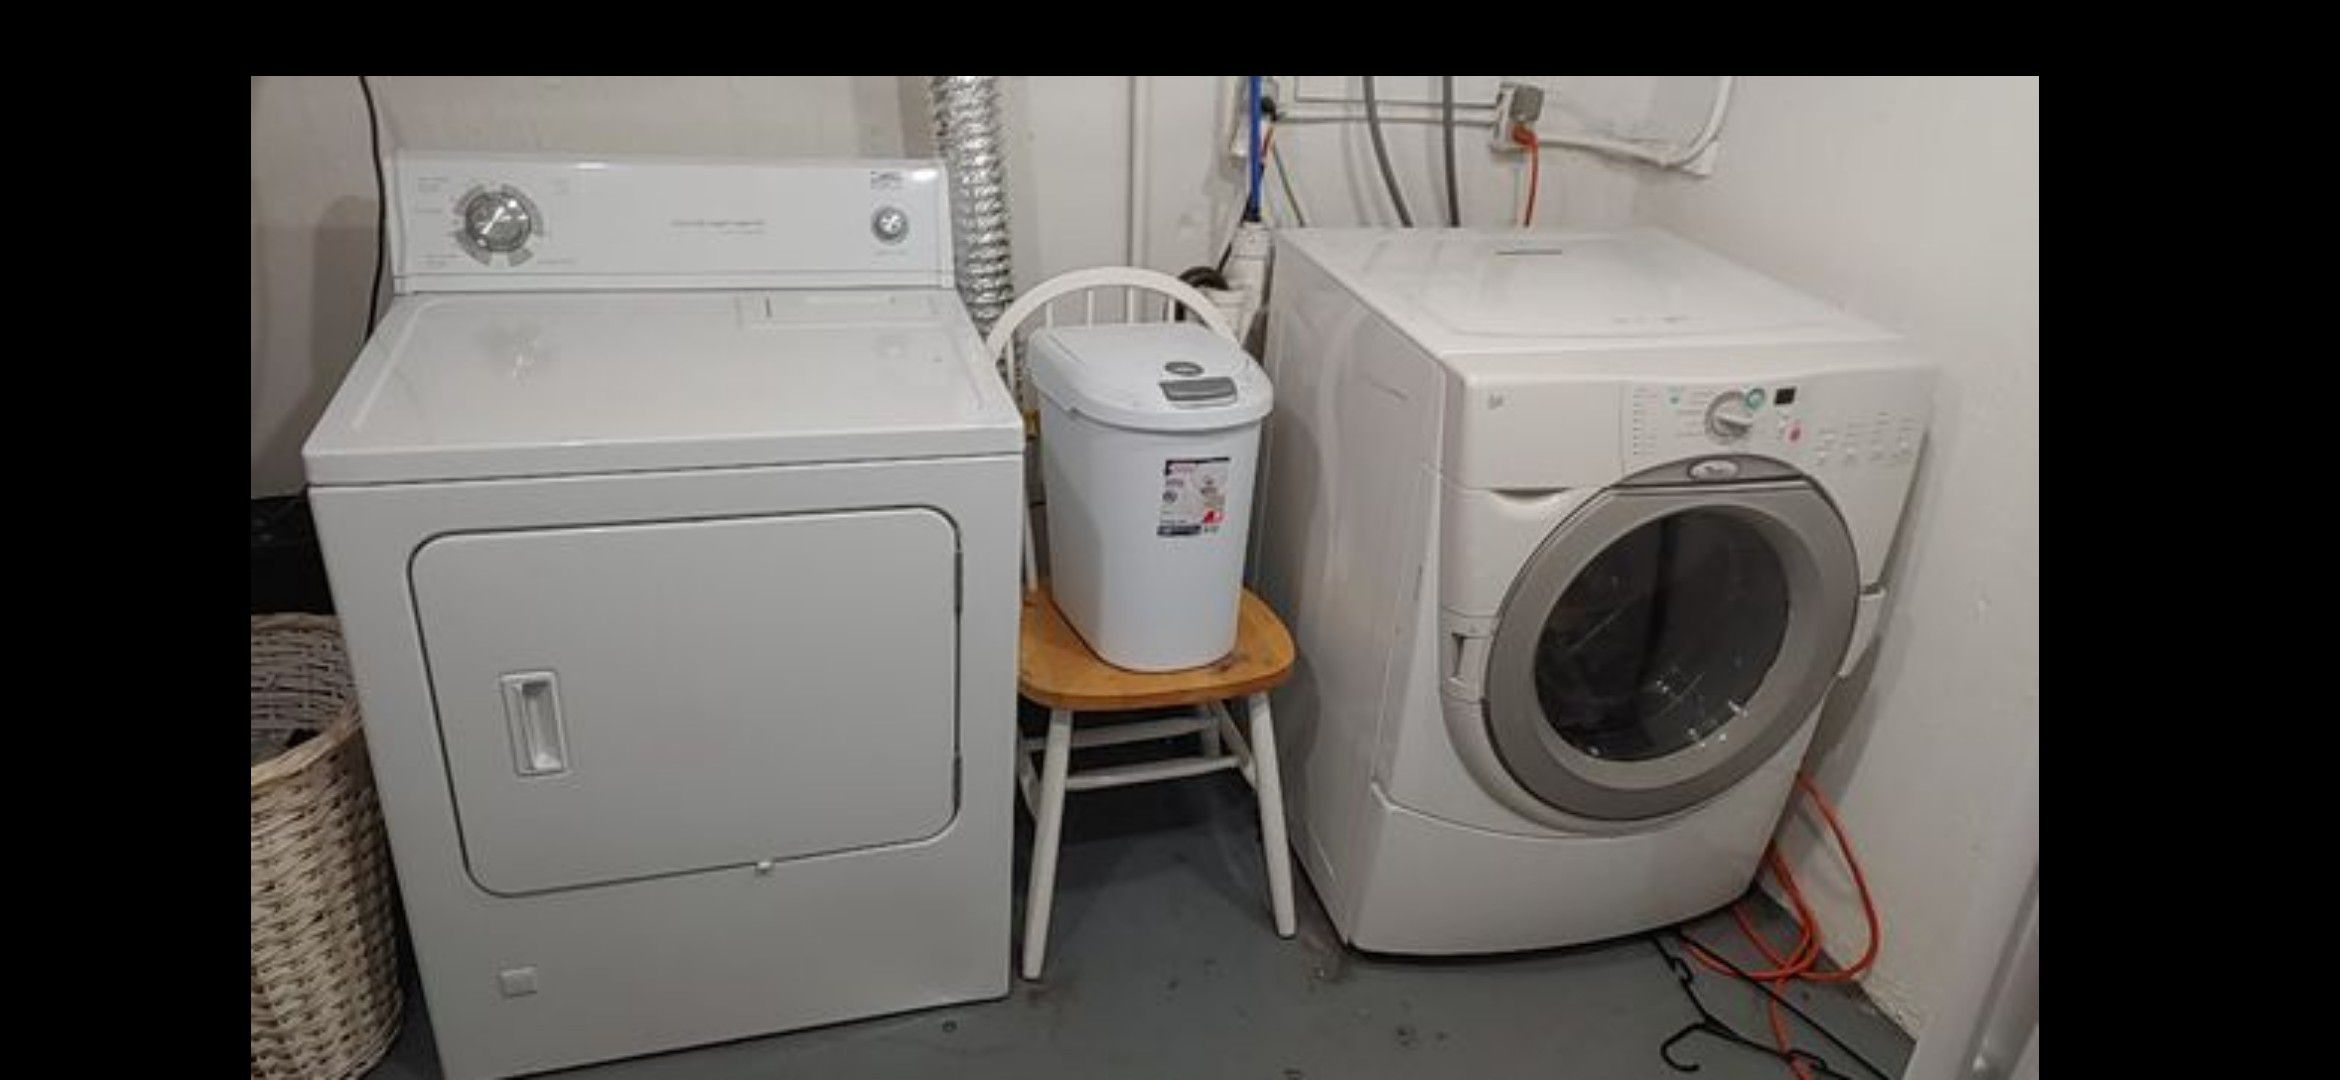 Whirpool duet washer and estate gas dryer